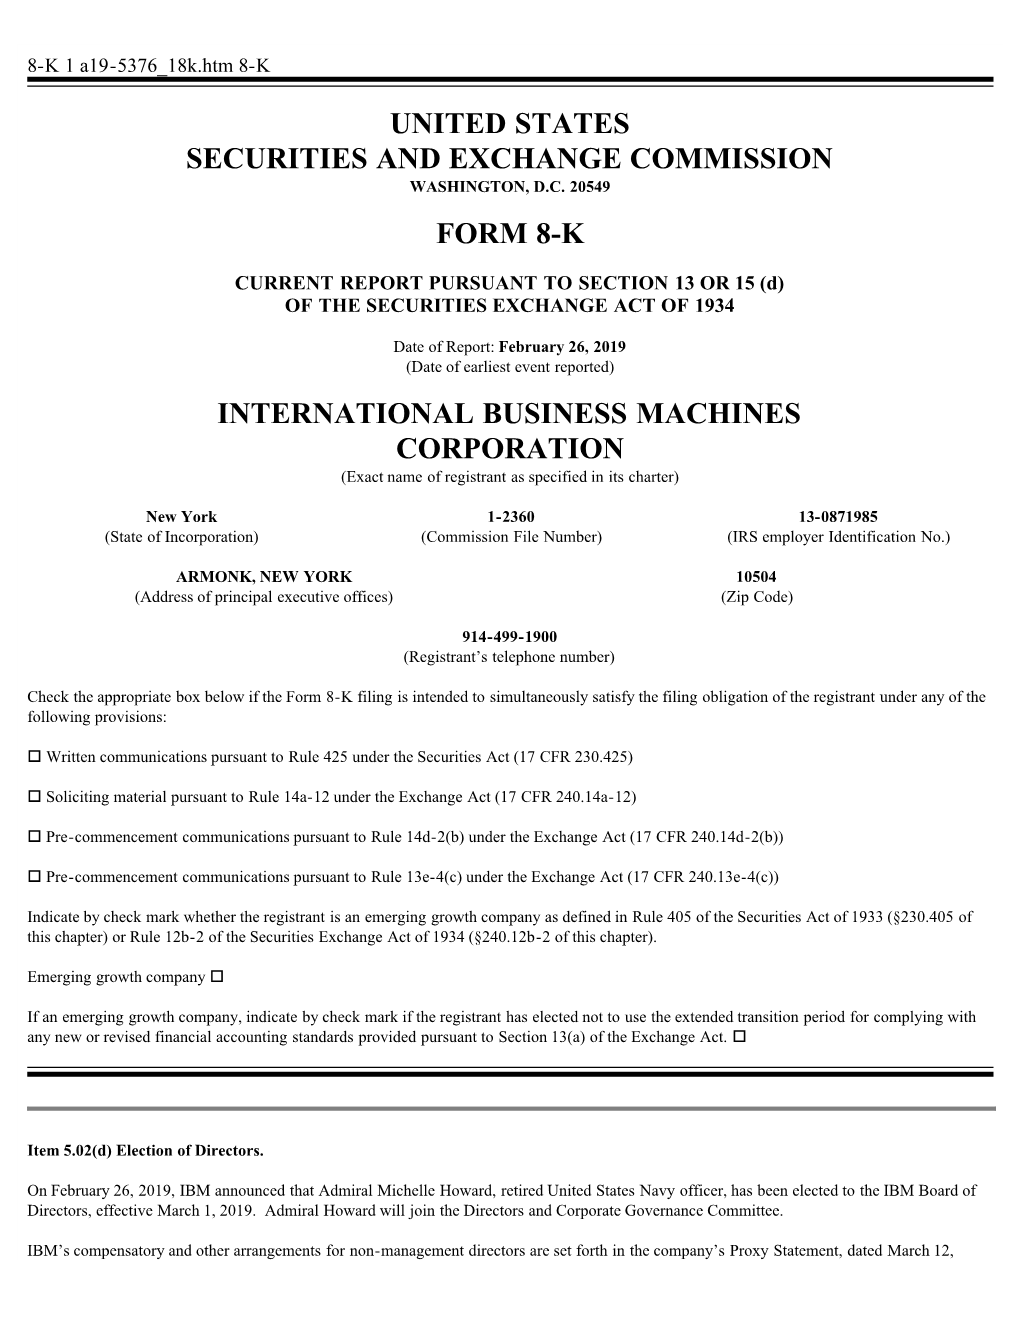 United States Securities and Exchange Commission Form 8-K International Business Machines Corporation